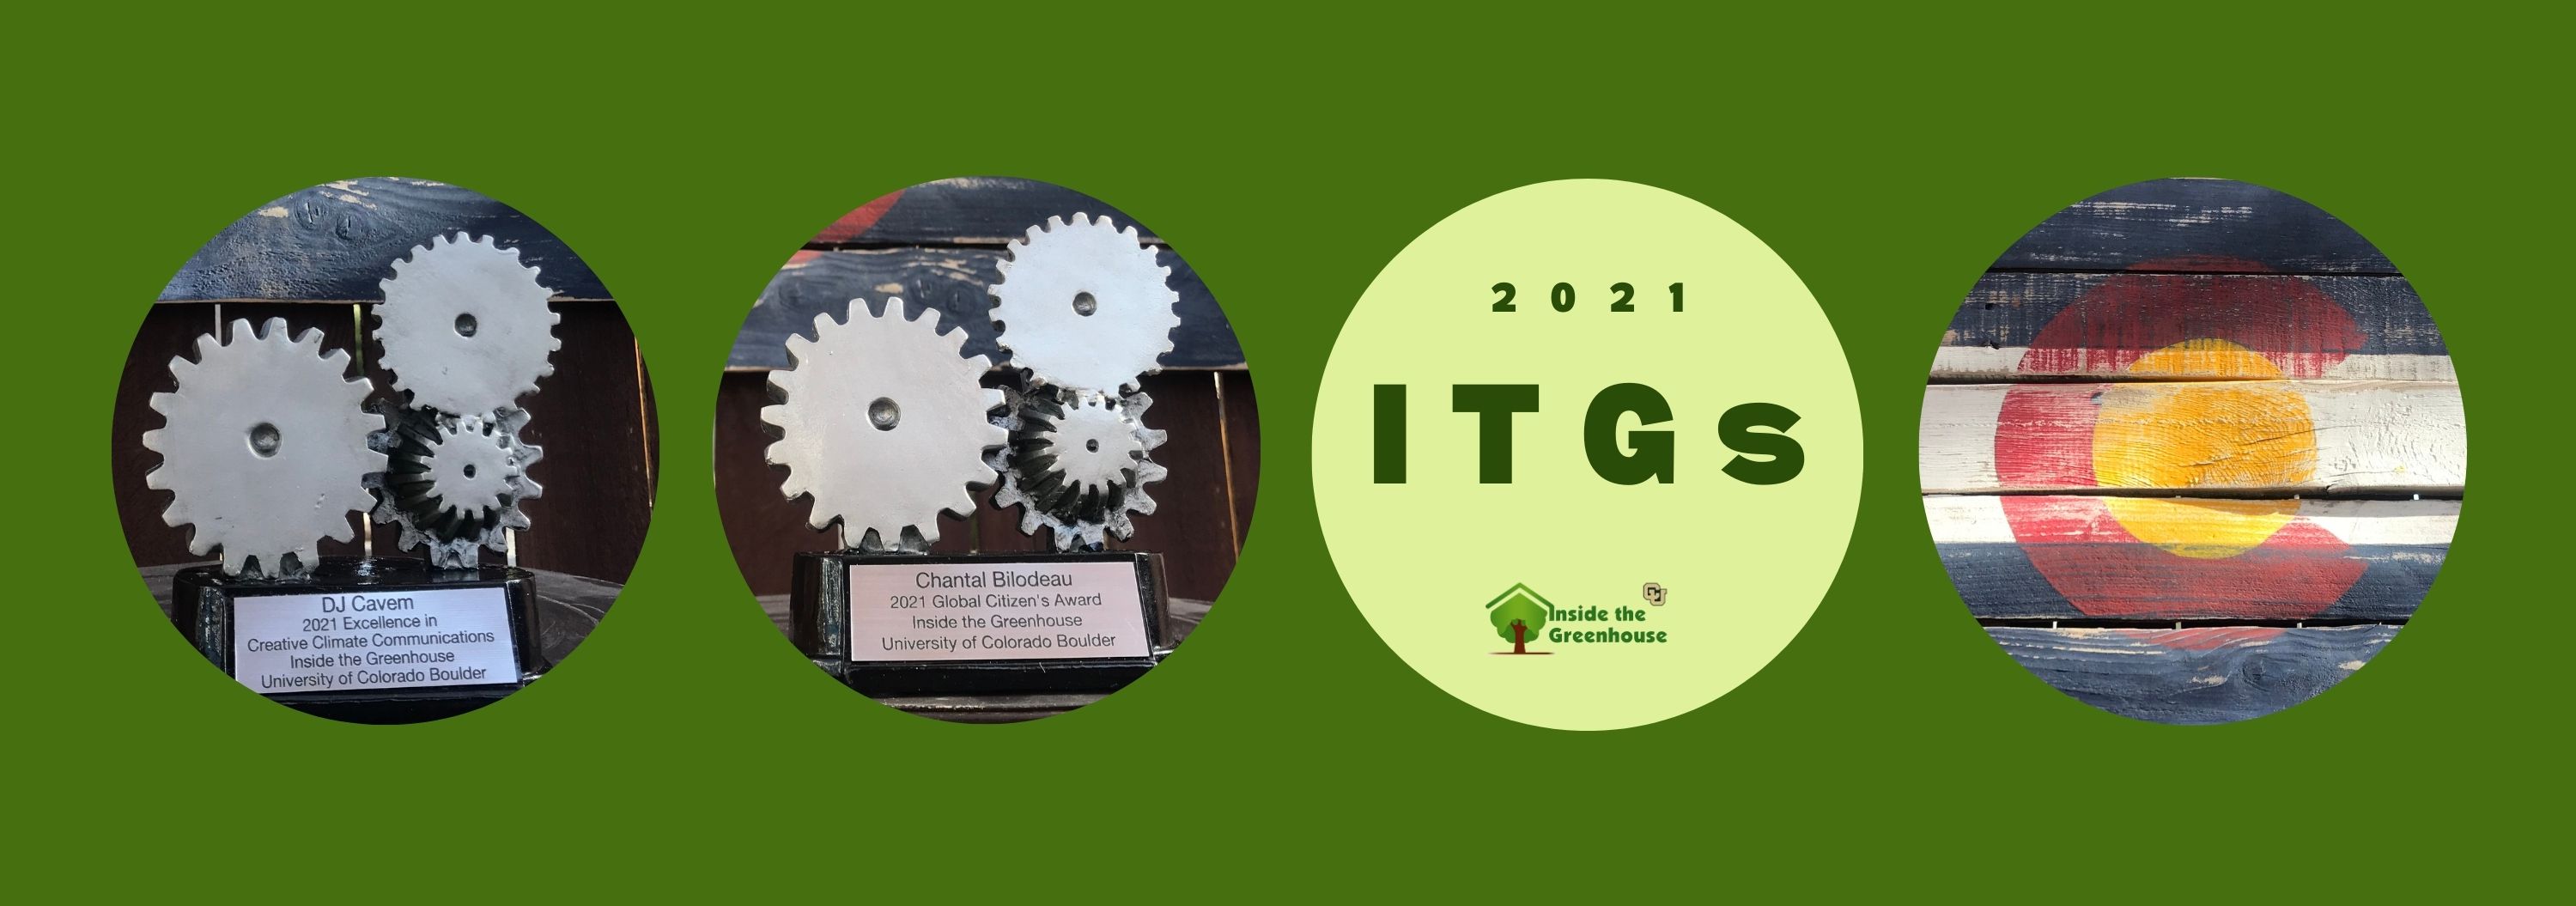 Annual ITGs (Inside the Greenhouse Award) Winners Banner